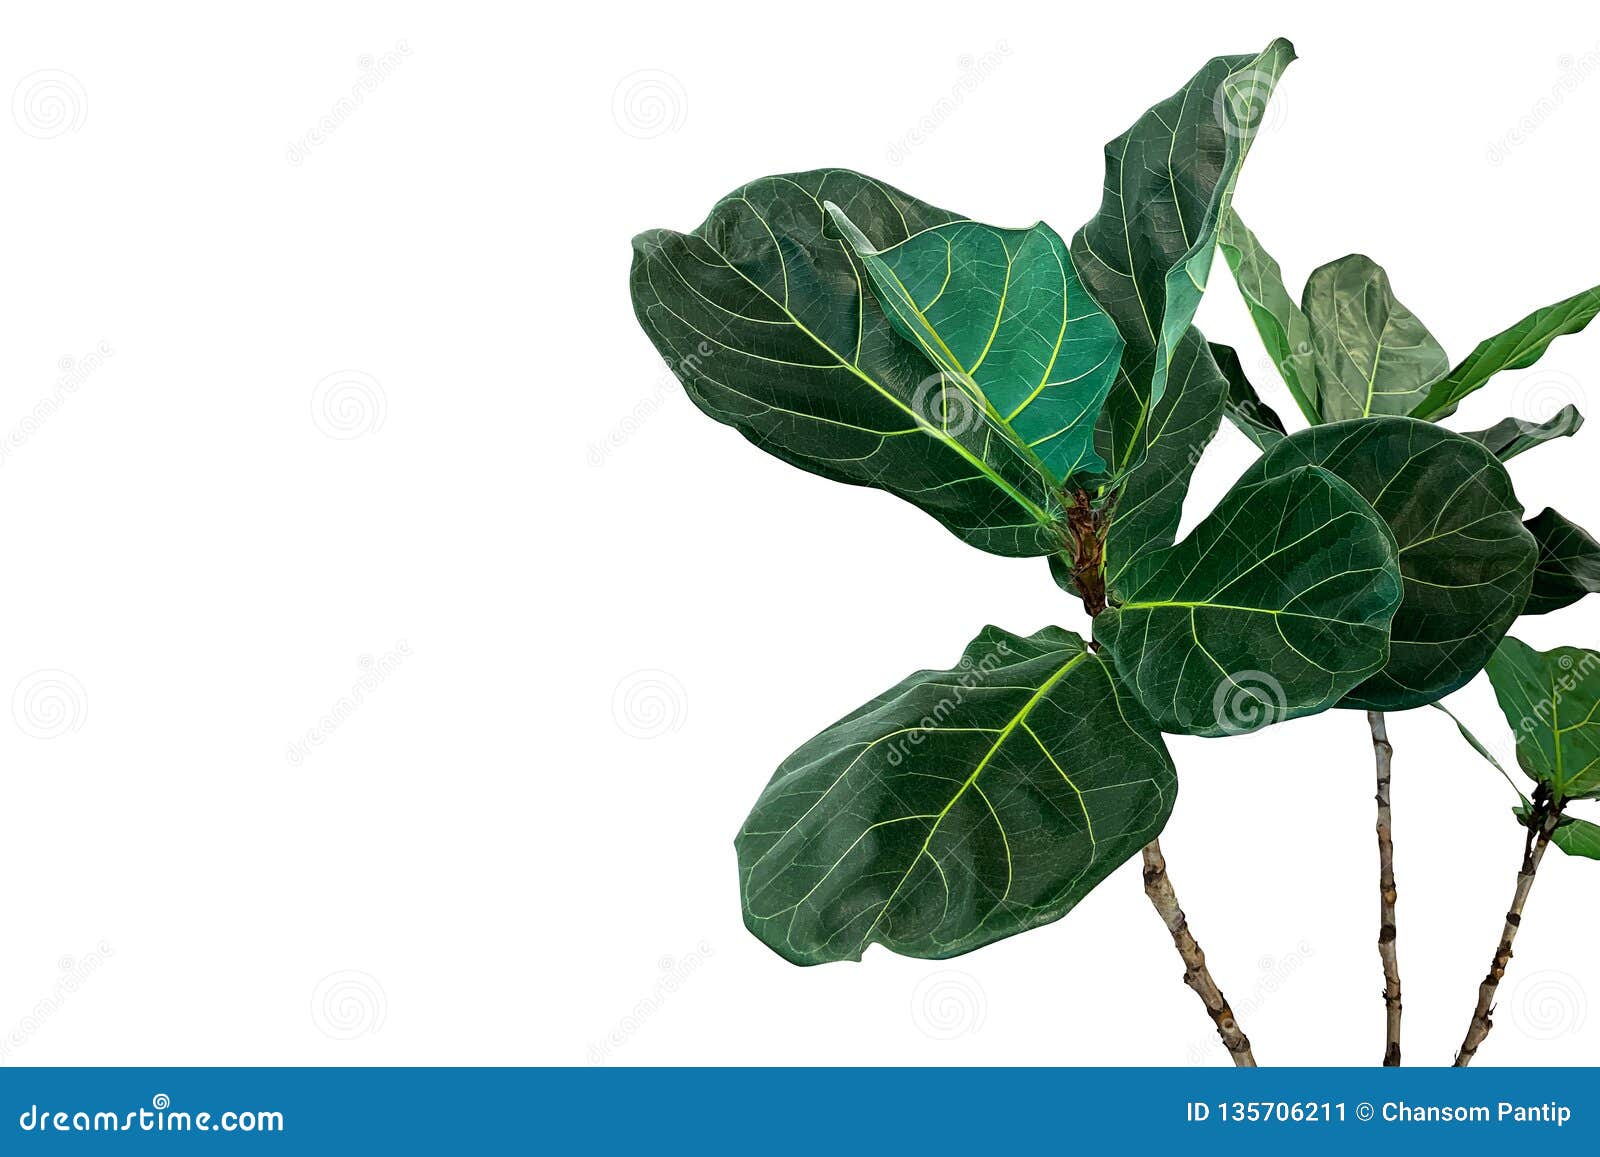 green leaves of fiddle-leaf fig tree ficus lyrata the popular ornamental tree tropical houseplant  on white background,